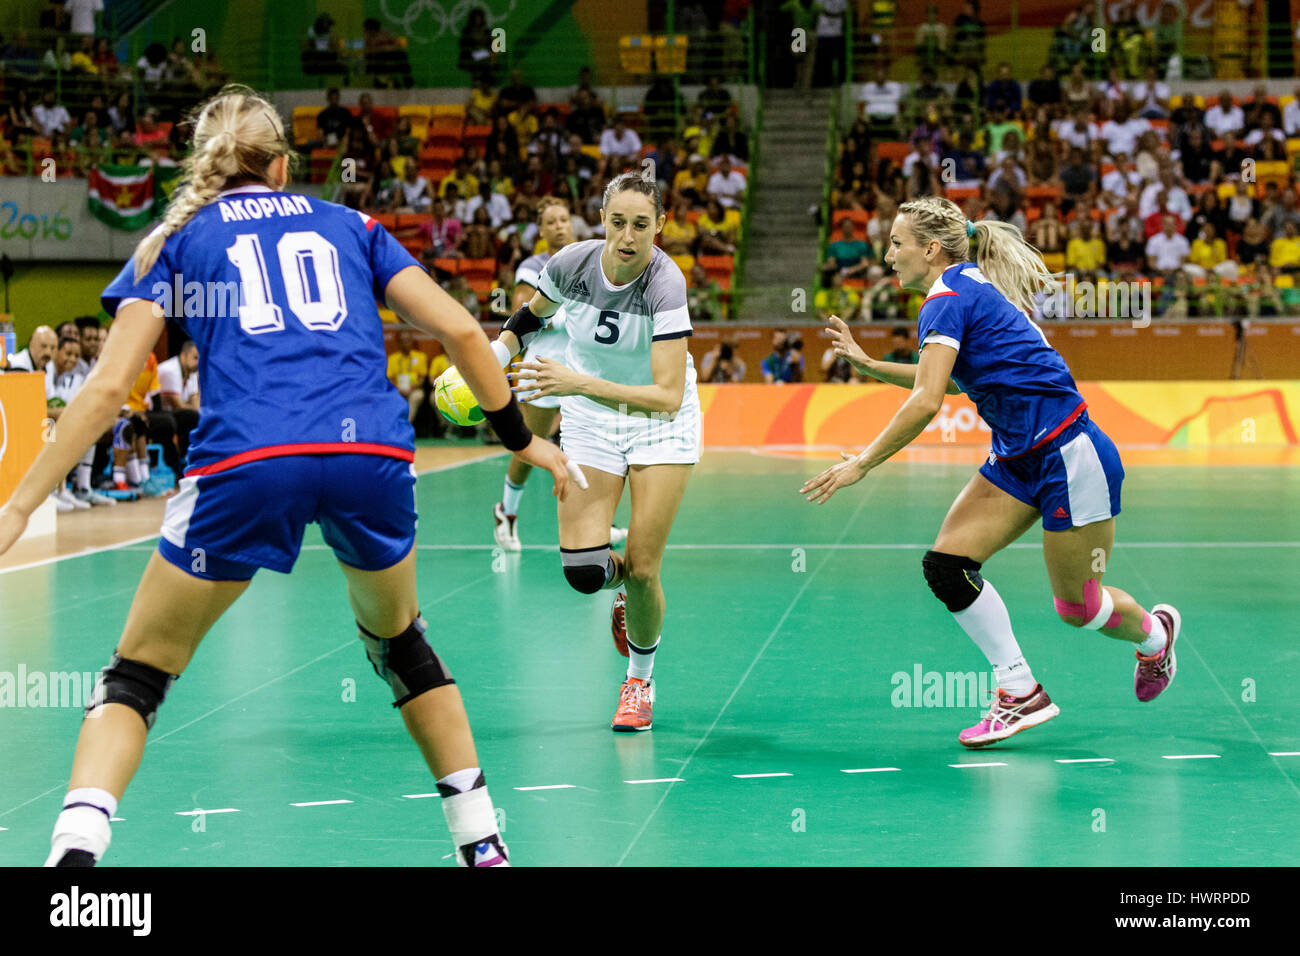 Rio de Janeiro, Brazil. 20 August 2016  Camille Ayglon-Saurina (FRA) #5 competes in the women's handball gold medal match Russia vs. France at the 201 Stock Photo